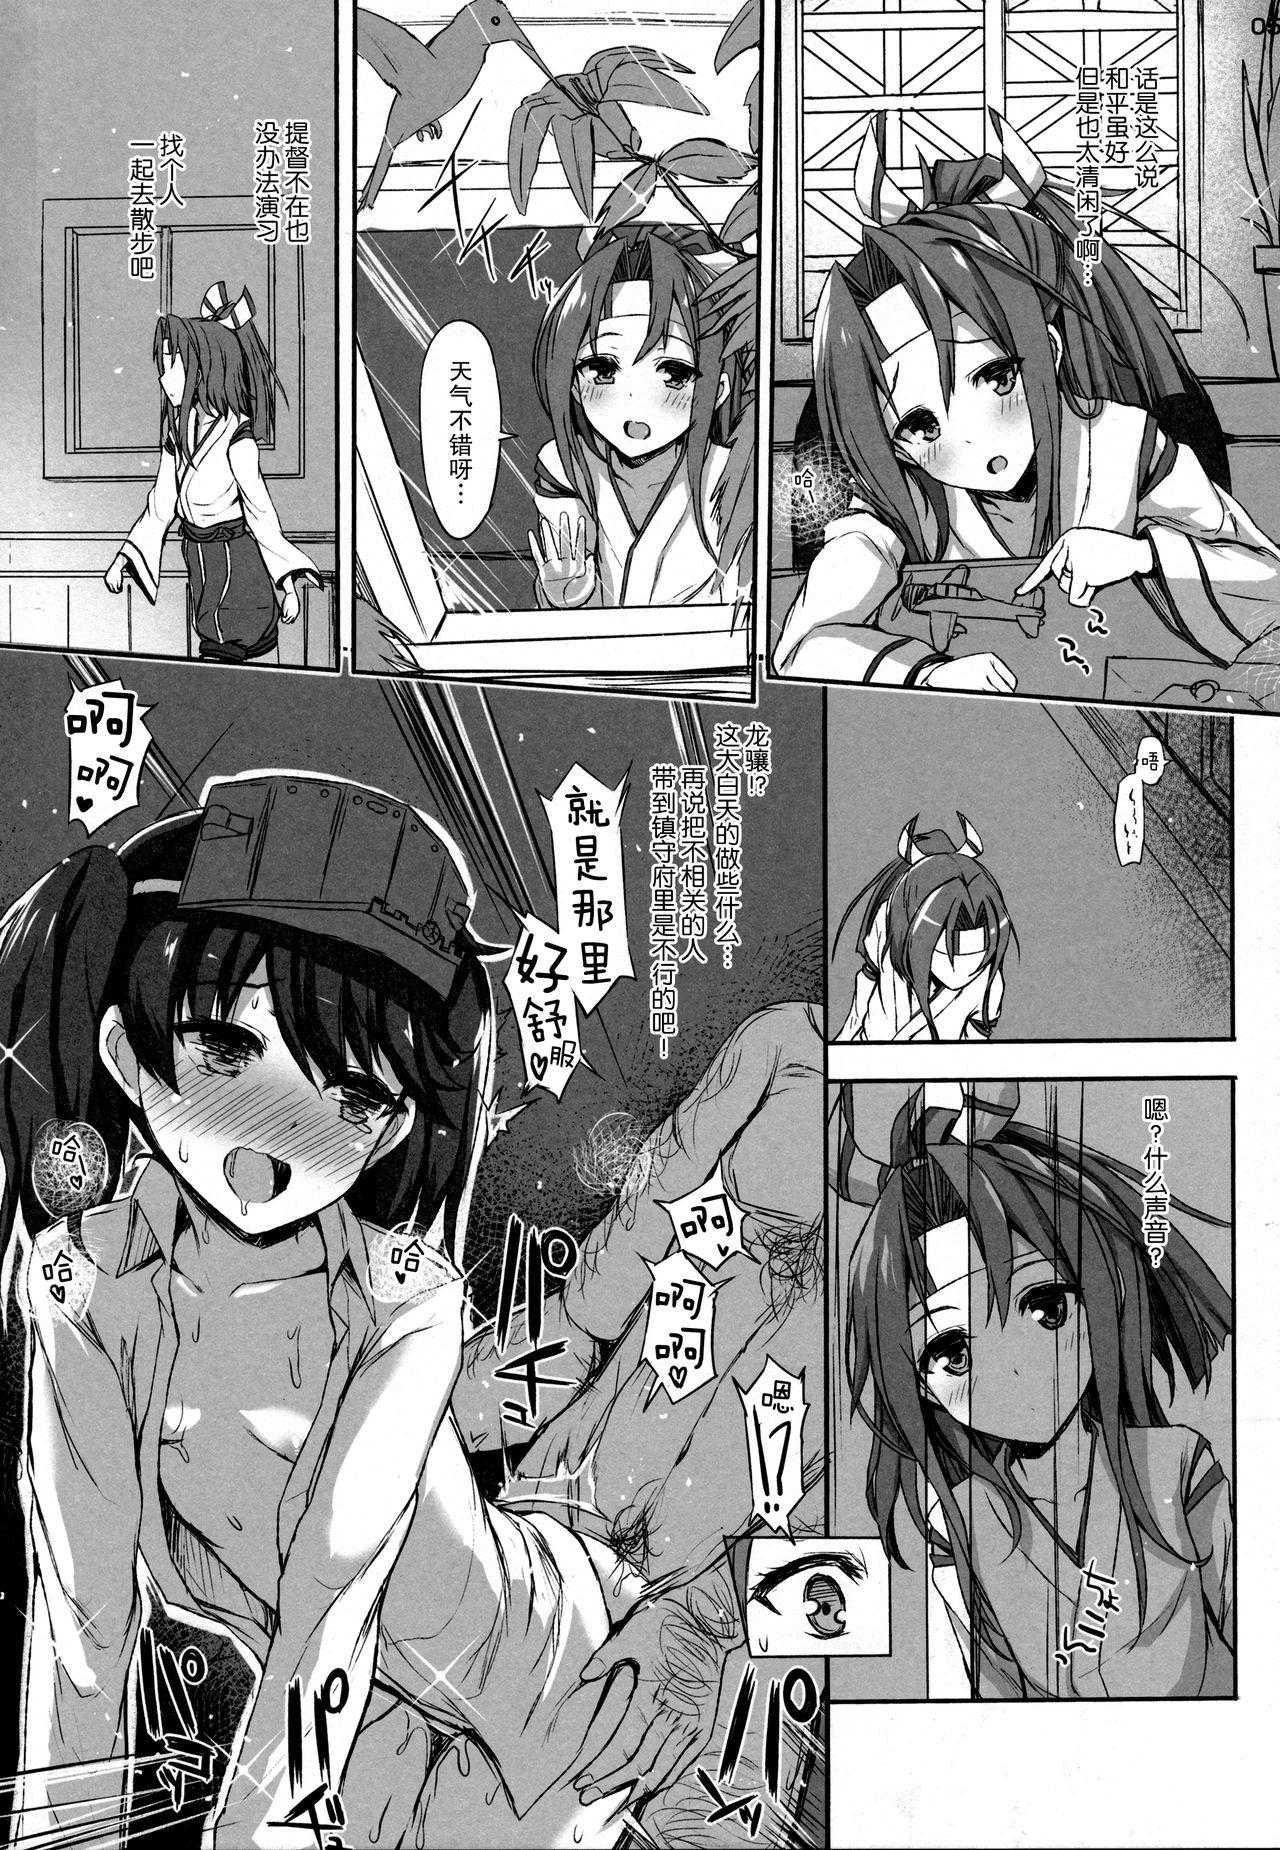 Jizz AND THEN NOTHING - Kantai collection Livesex - Page 5